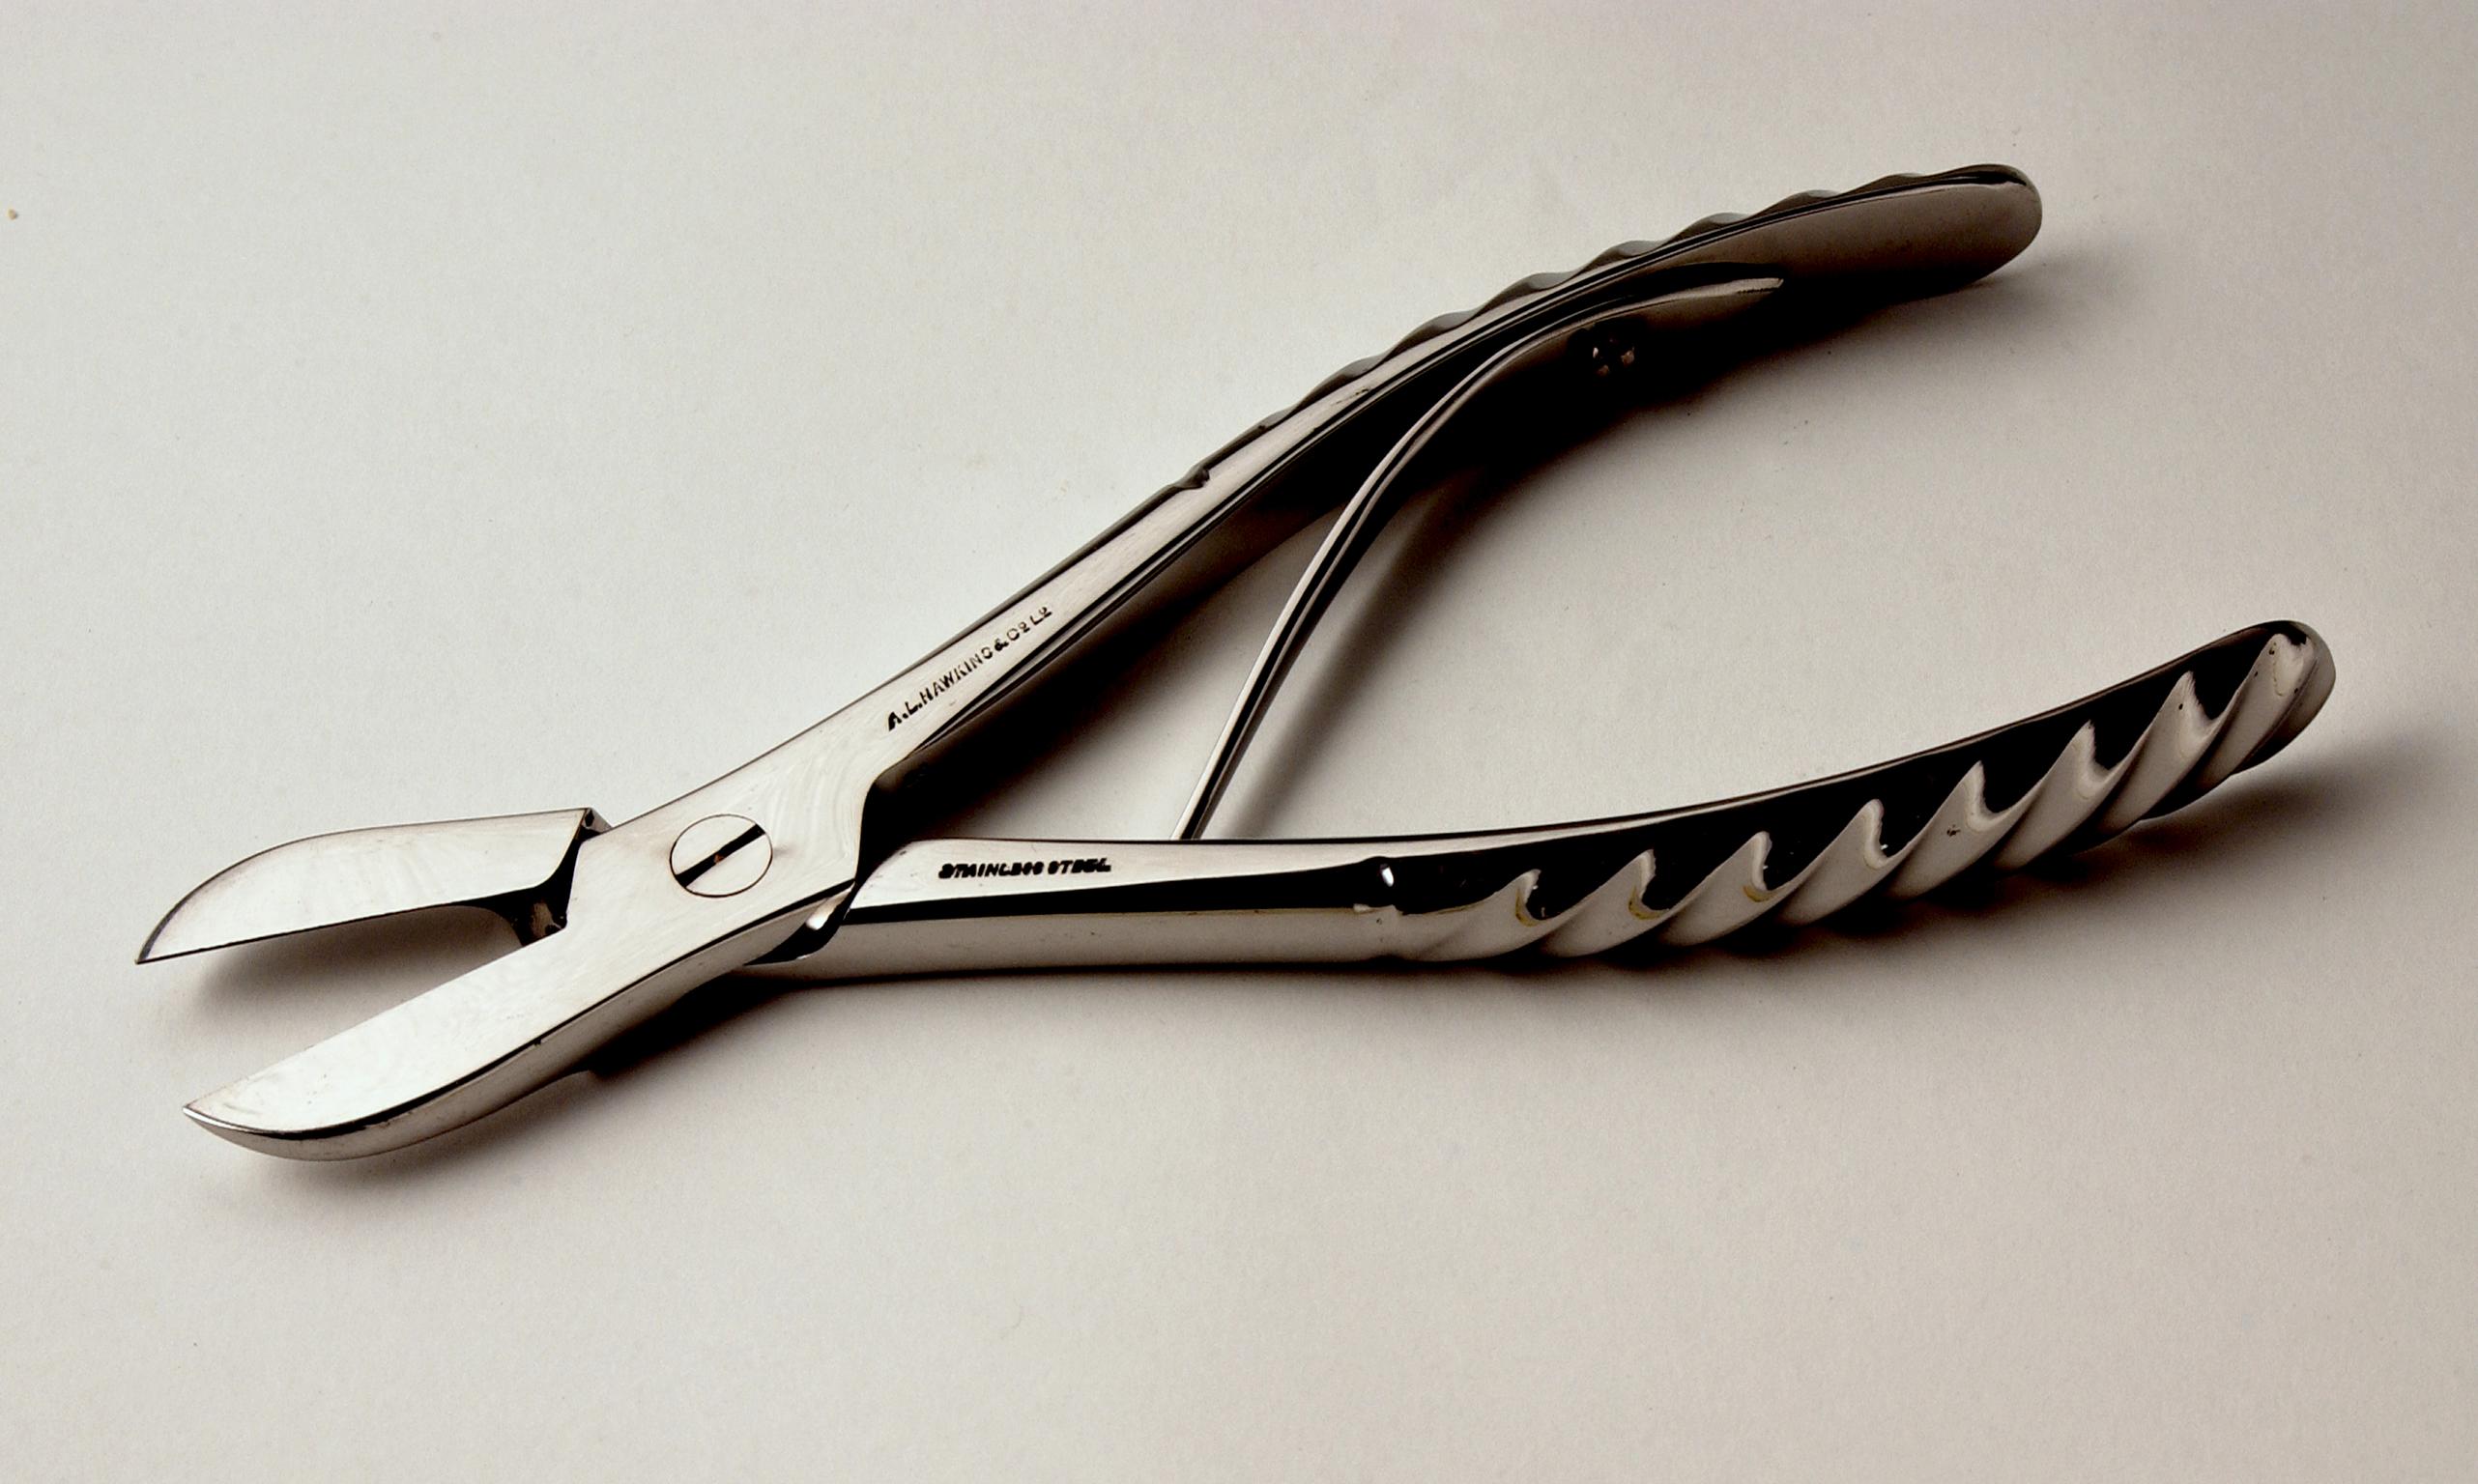 Surgical snips